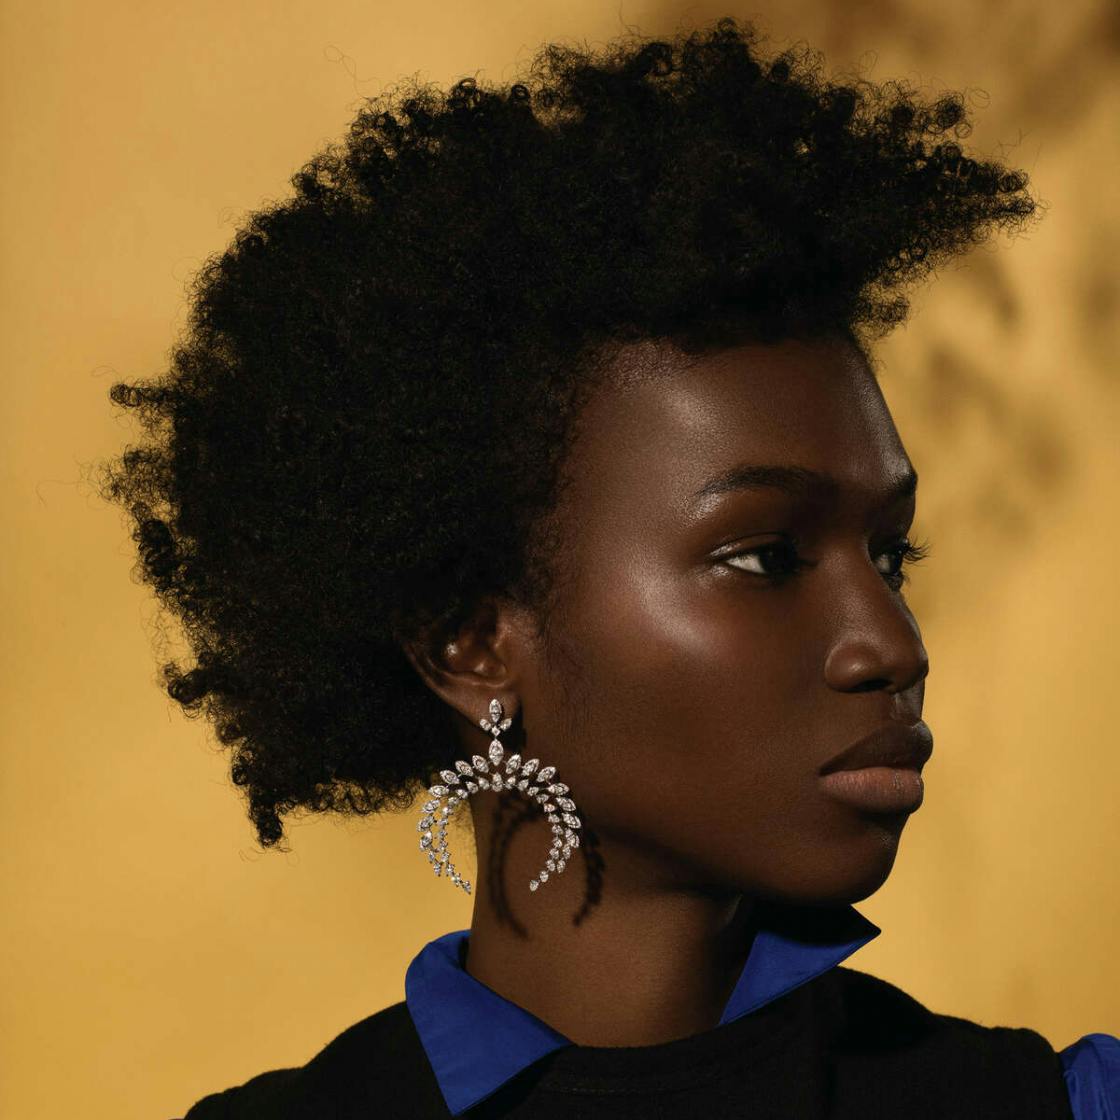 Hair equality update: where next for the natural hair movement?